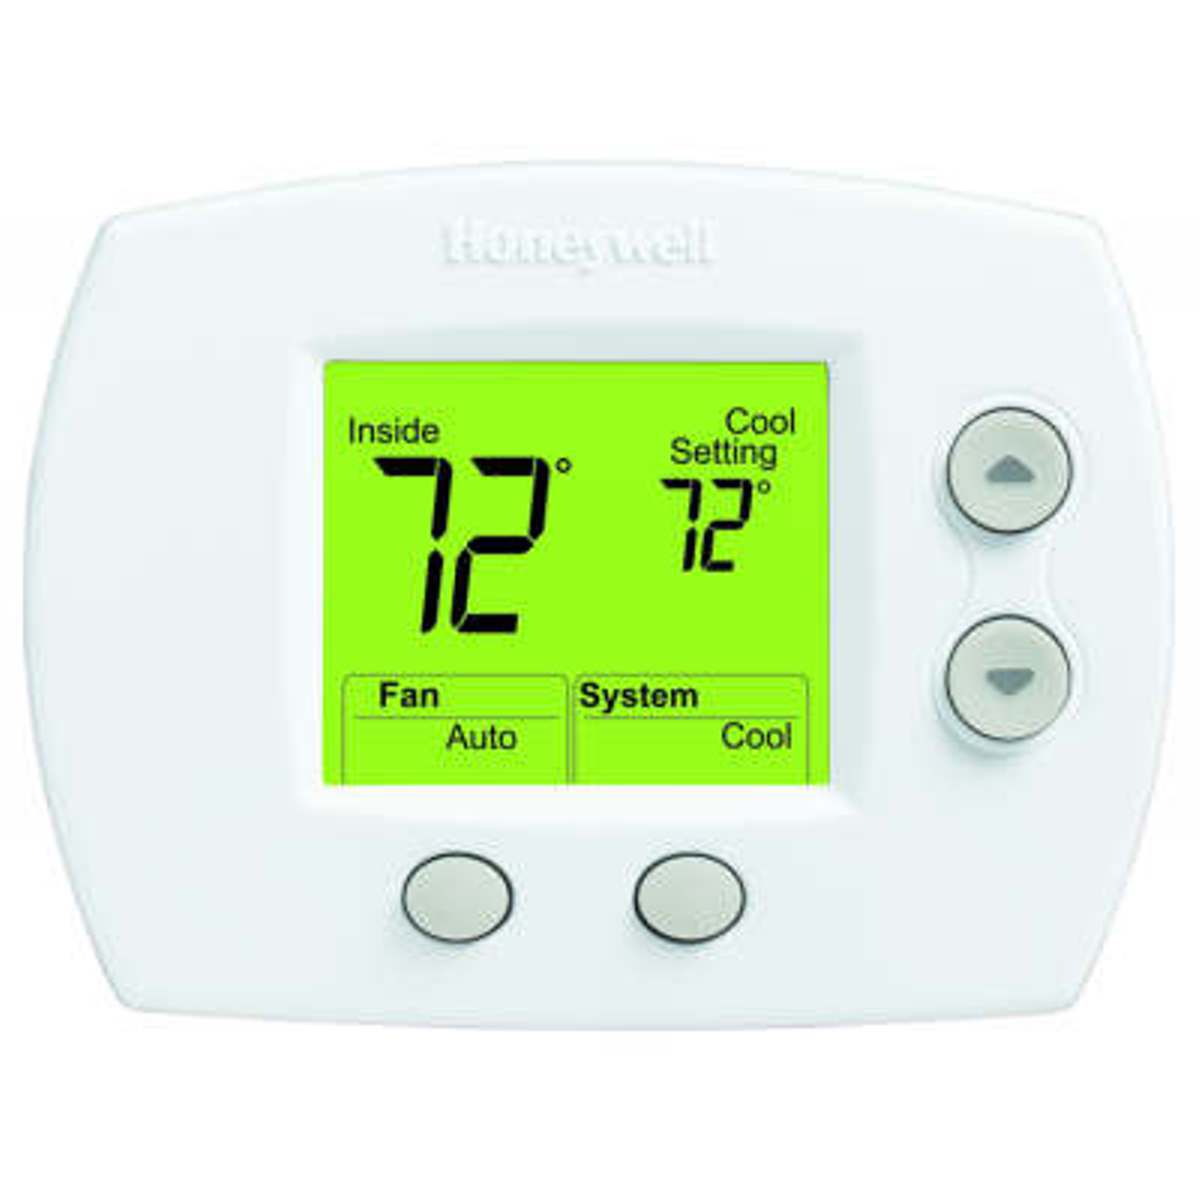 Honeywell TH5110D1022/U 5000 Thermostat With Display, Digital, Non-Programmable Thermostat